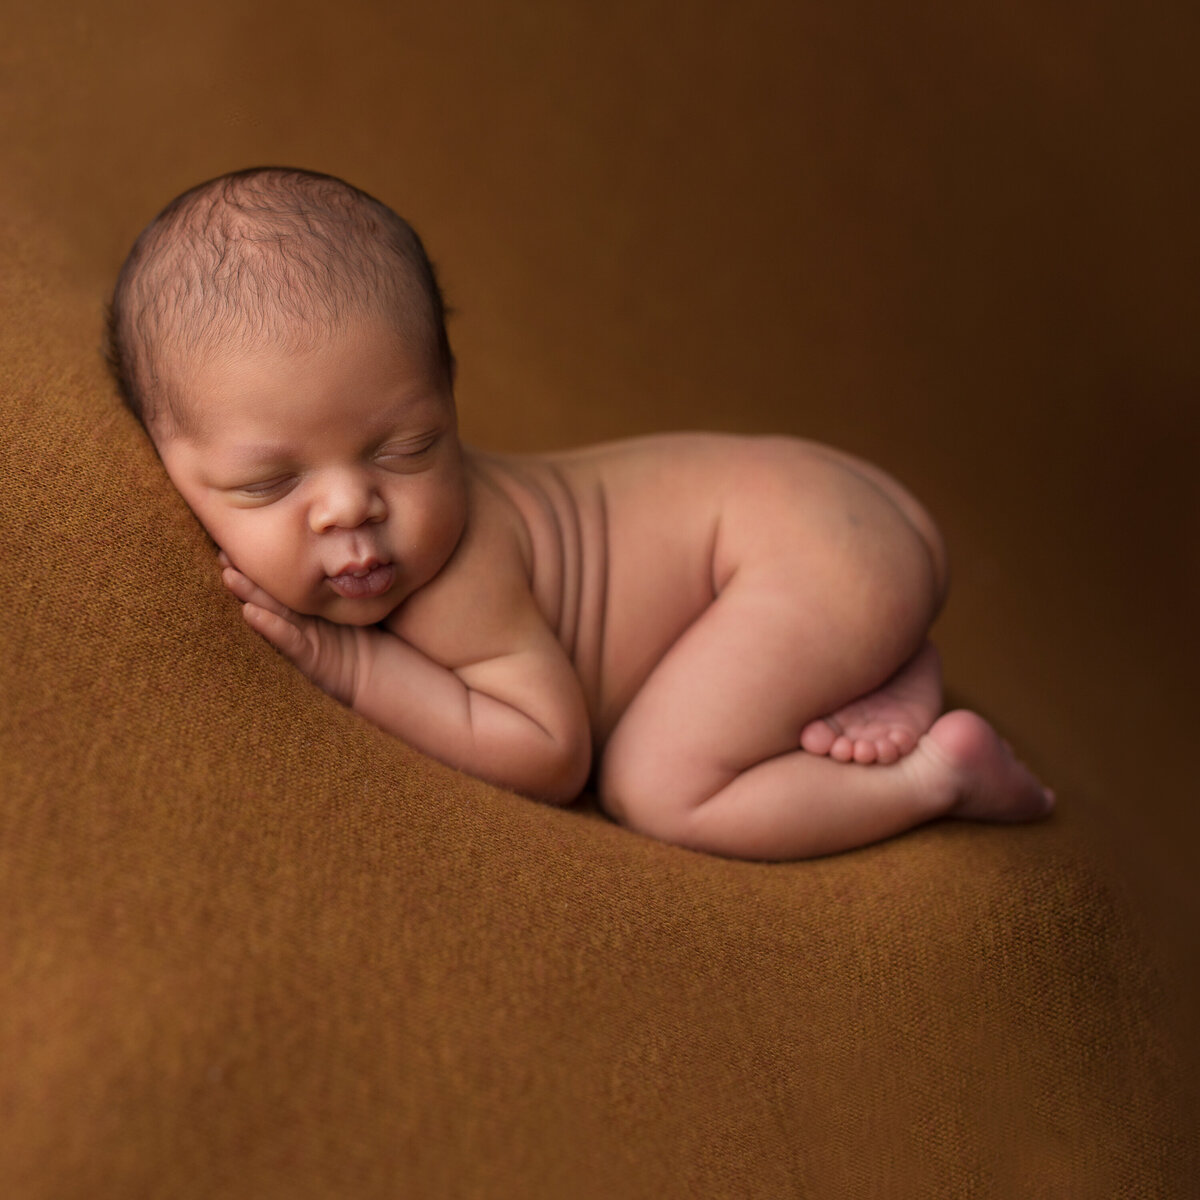 Black baby boy lies on his stomach with his feet crossed under him.  He is on a brown backdrop.  He has baby rolls and chubby cheeks.